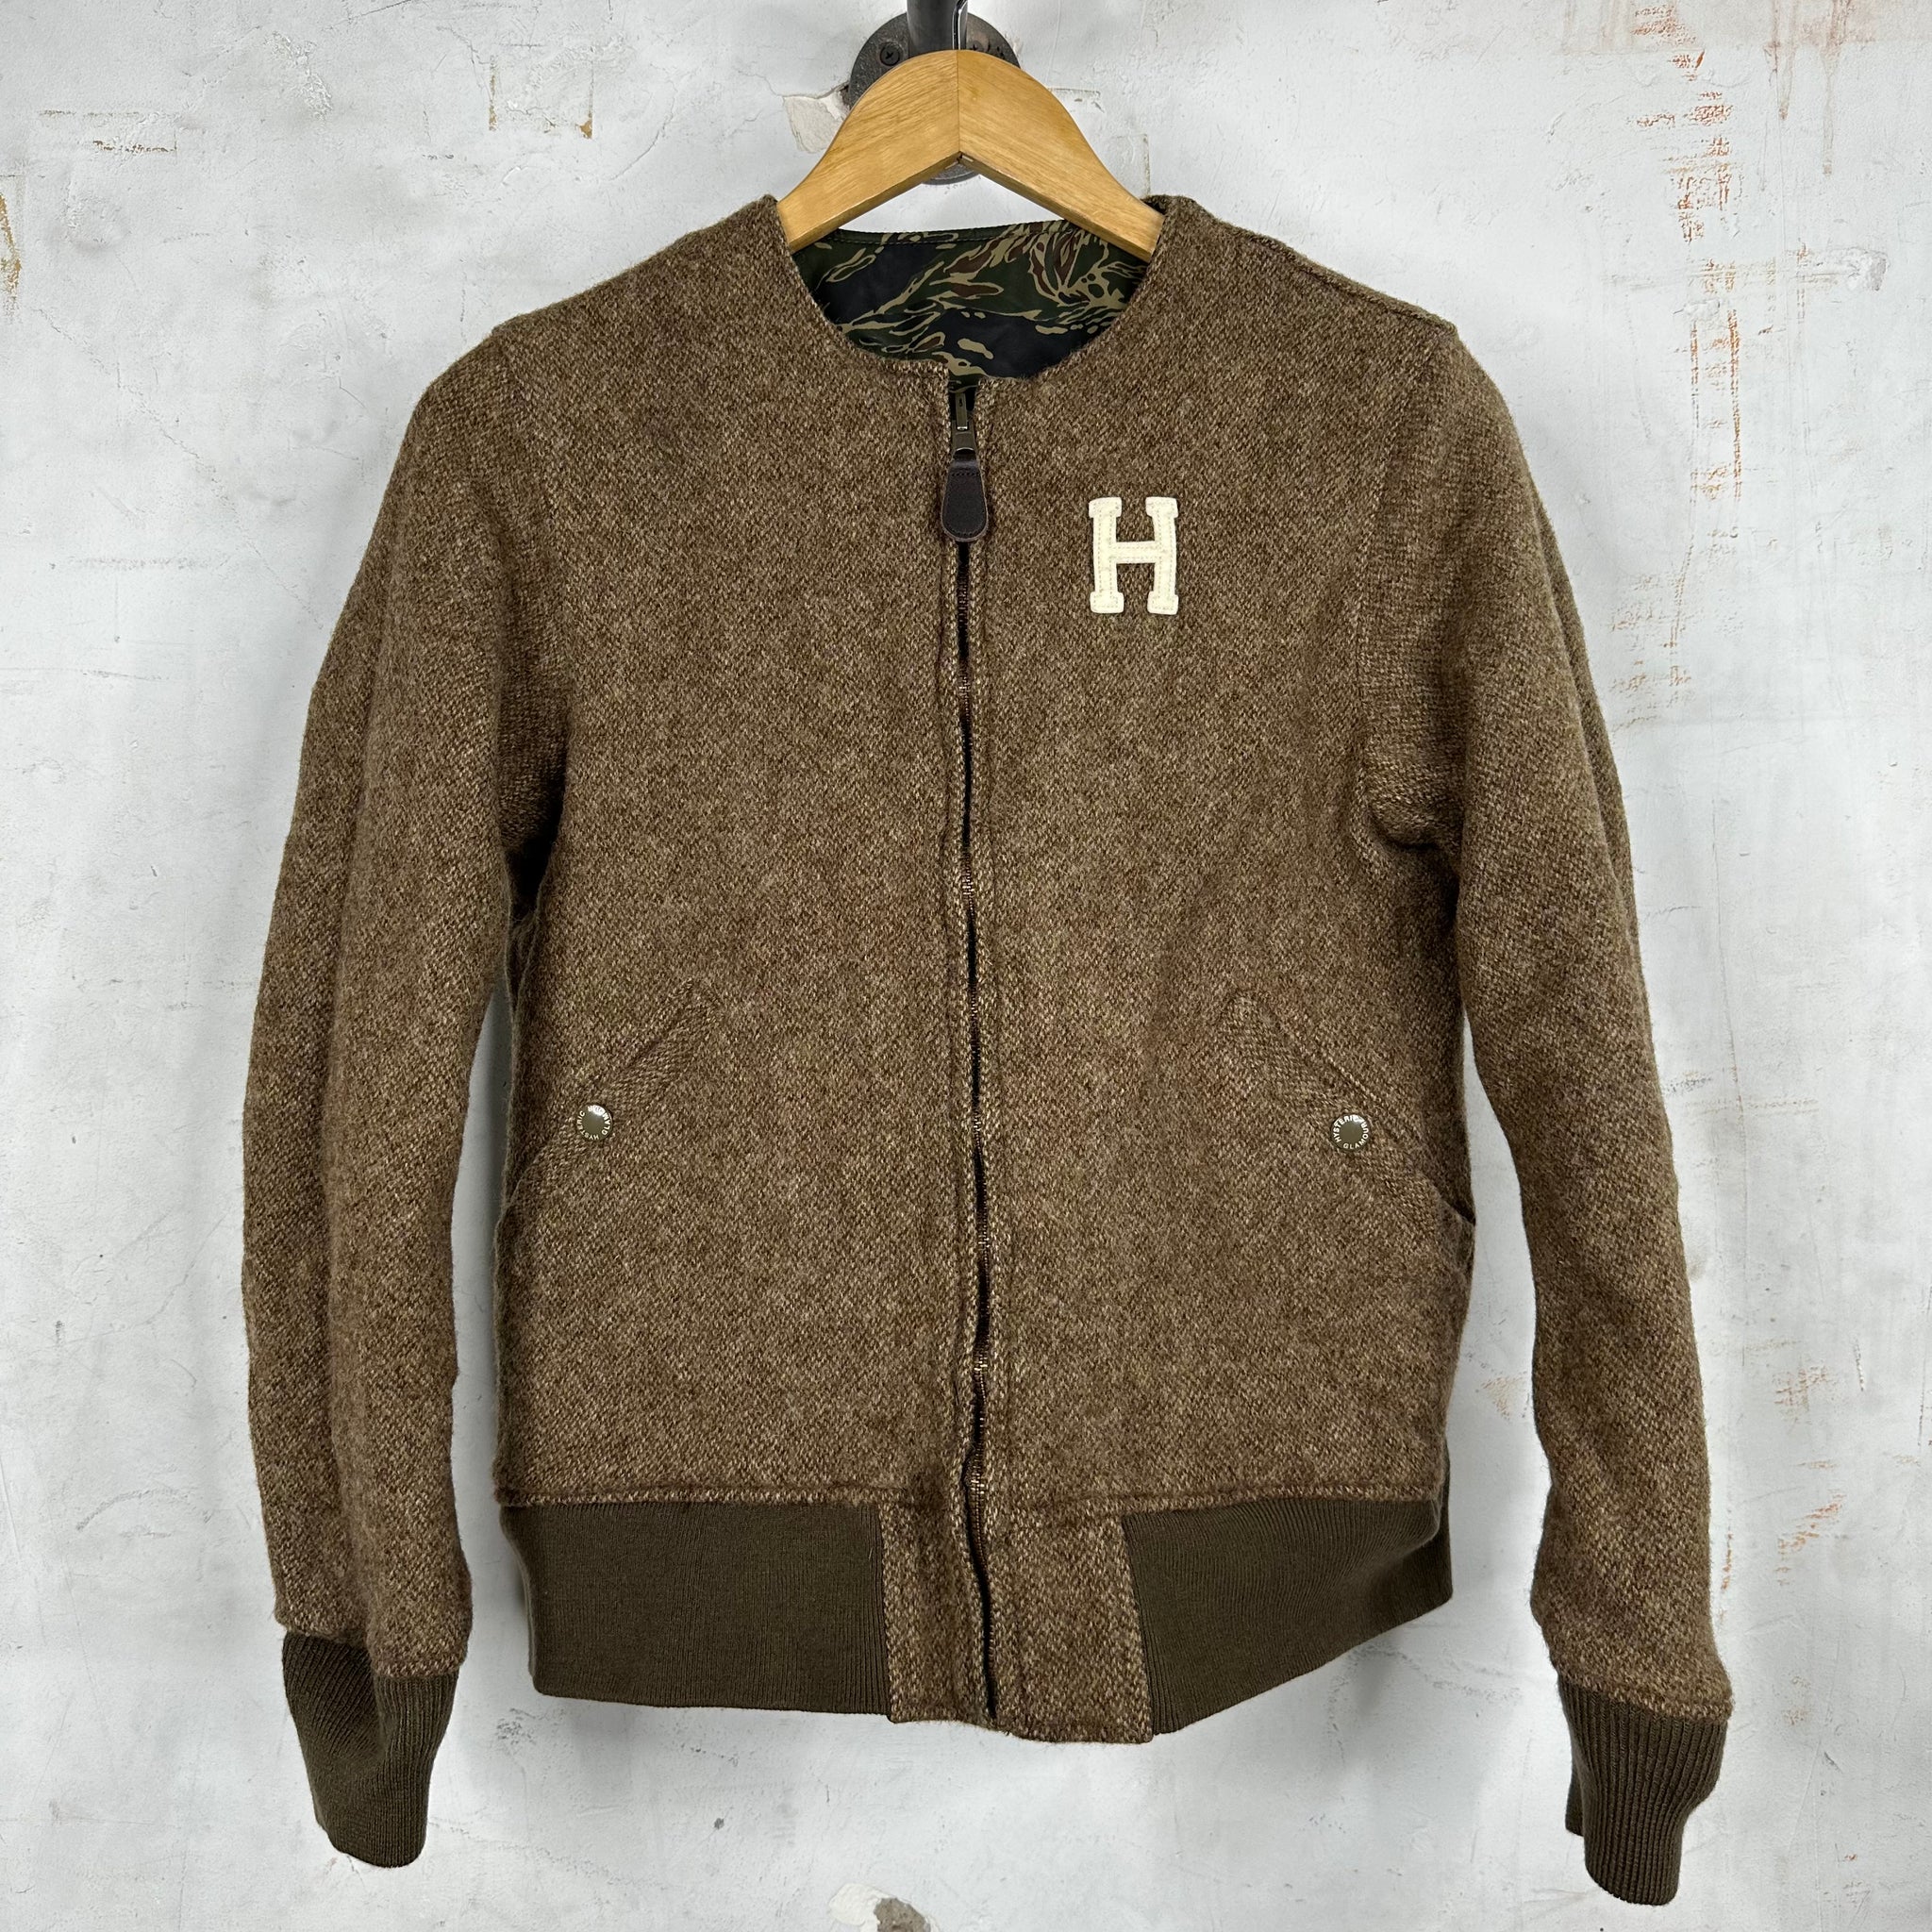 Hysteric Glamour Reversible Fatigue Bomber